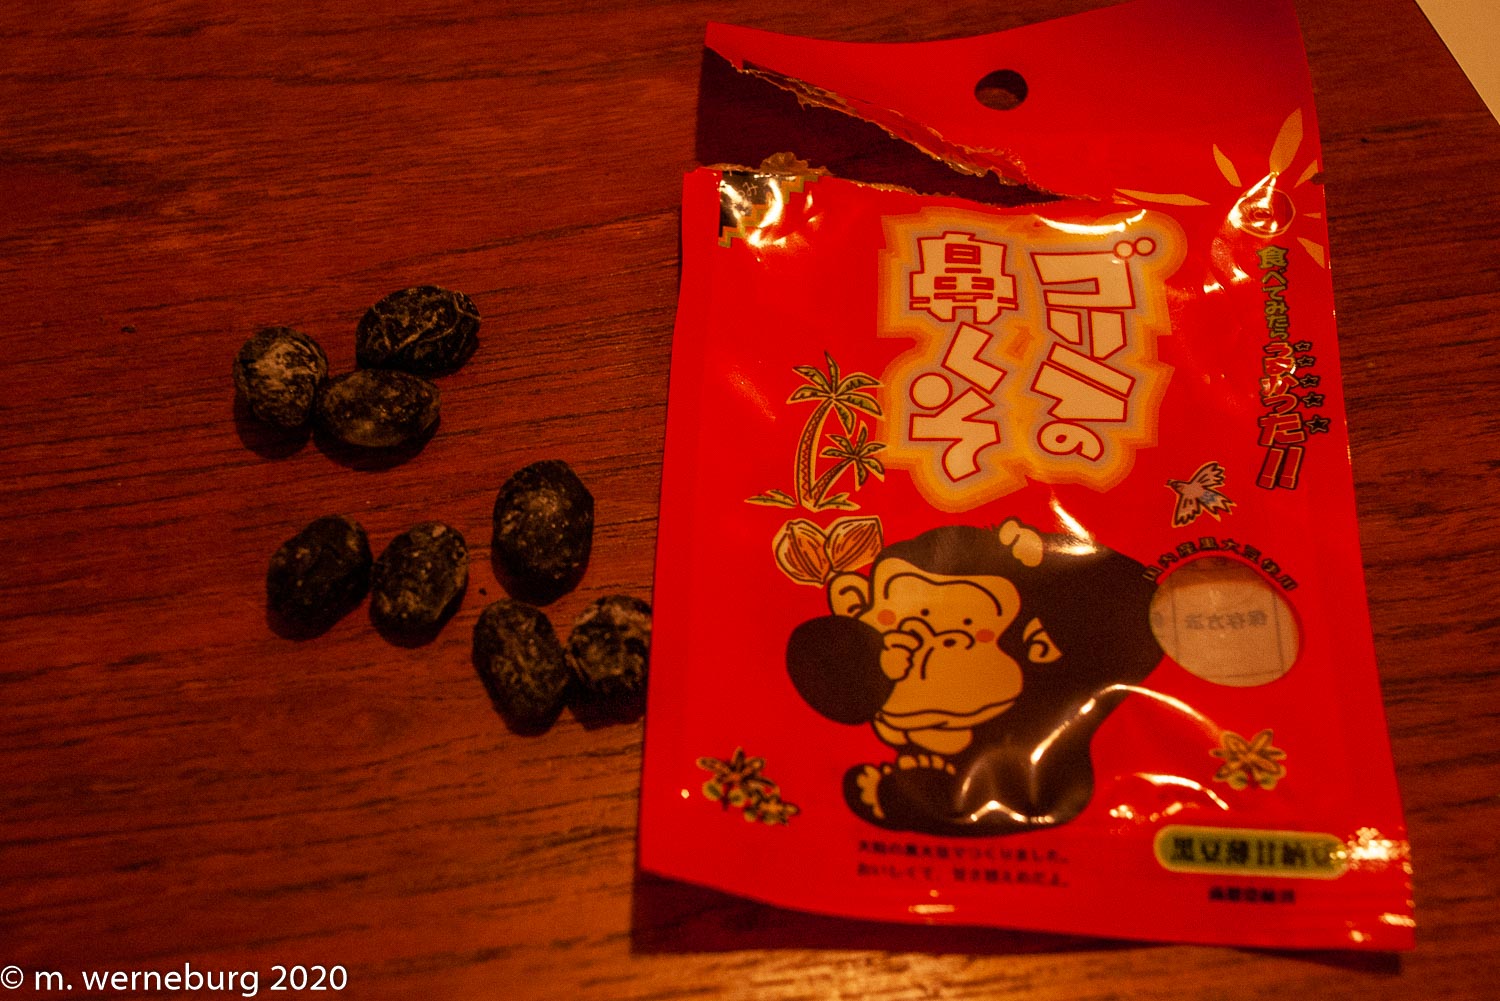 gorilla snot candy